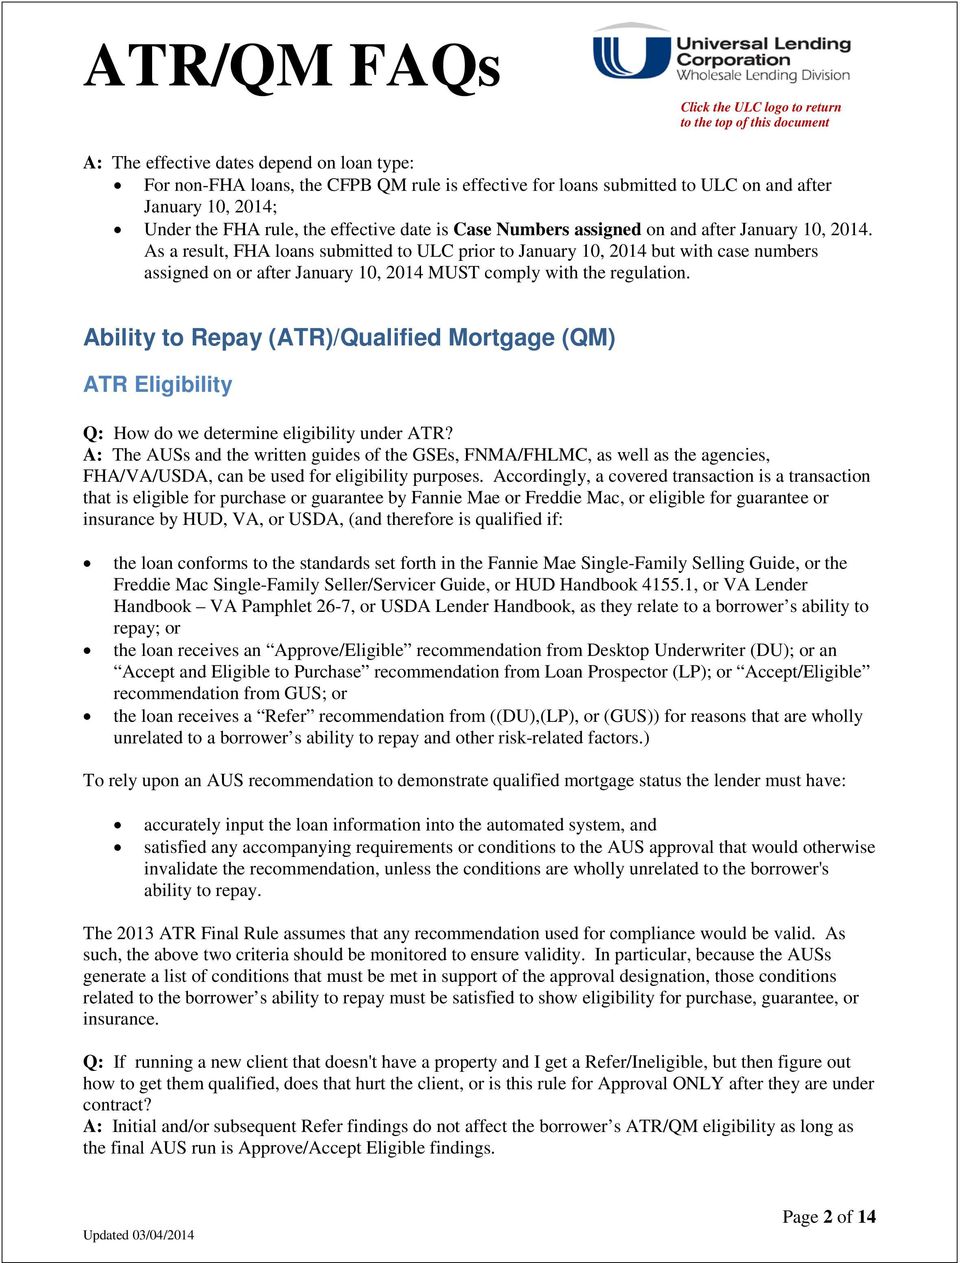 As a result, FHA loans submitted to ULC prior to January 10, 2014 but with case numbers assigned on or after January 10, 2014 MUST comply with the regulation.